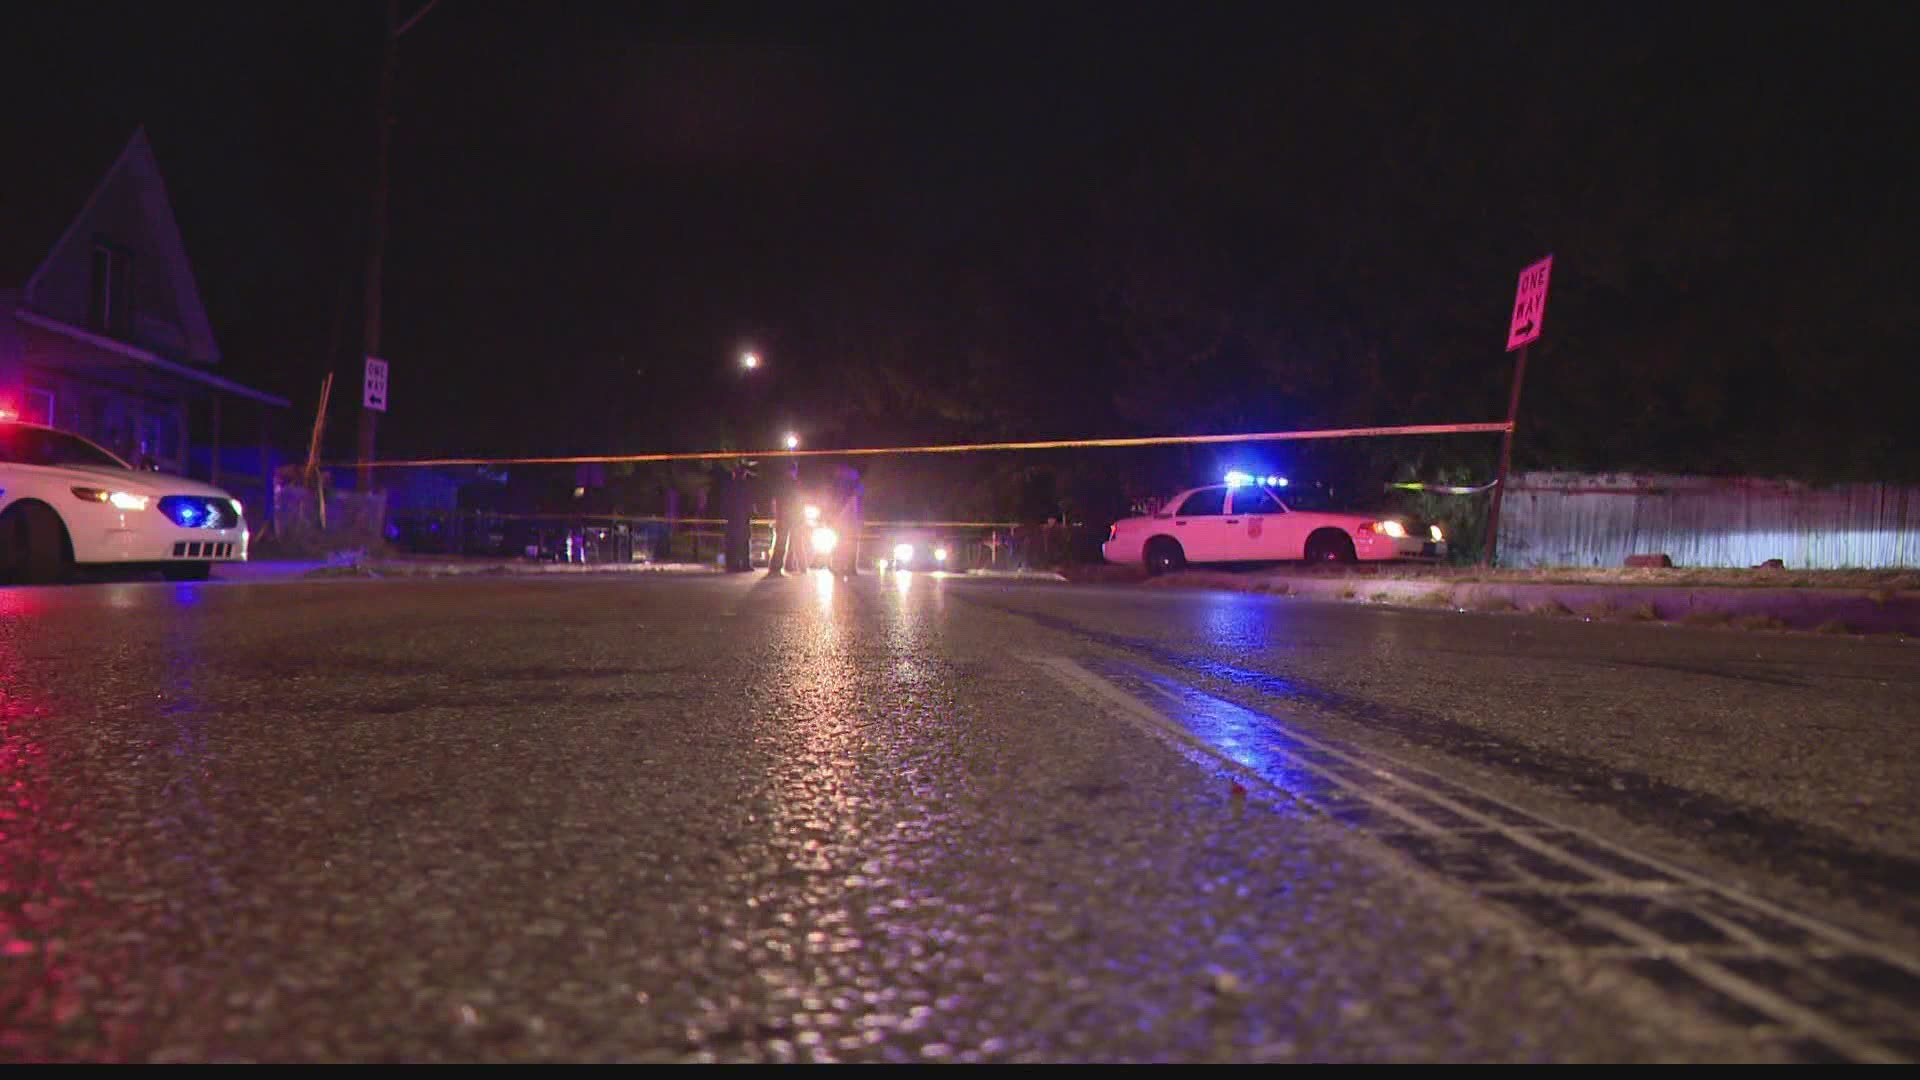 Police found a man shot on W. 29th St. and he later died at the hospital.